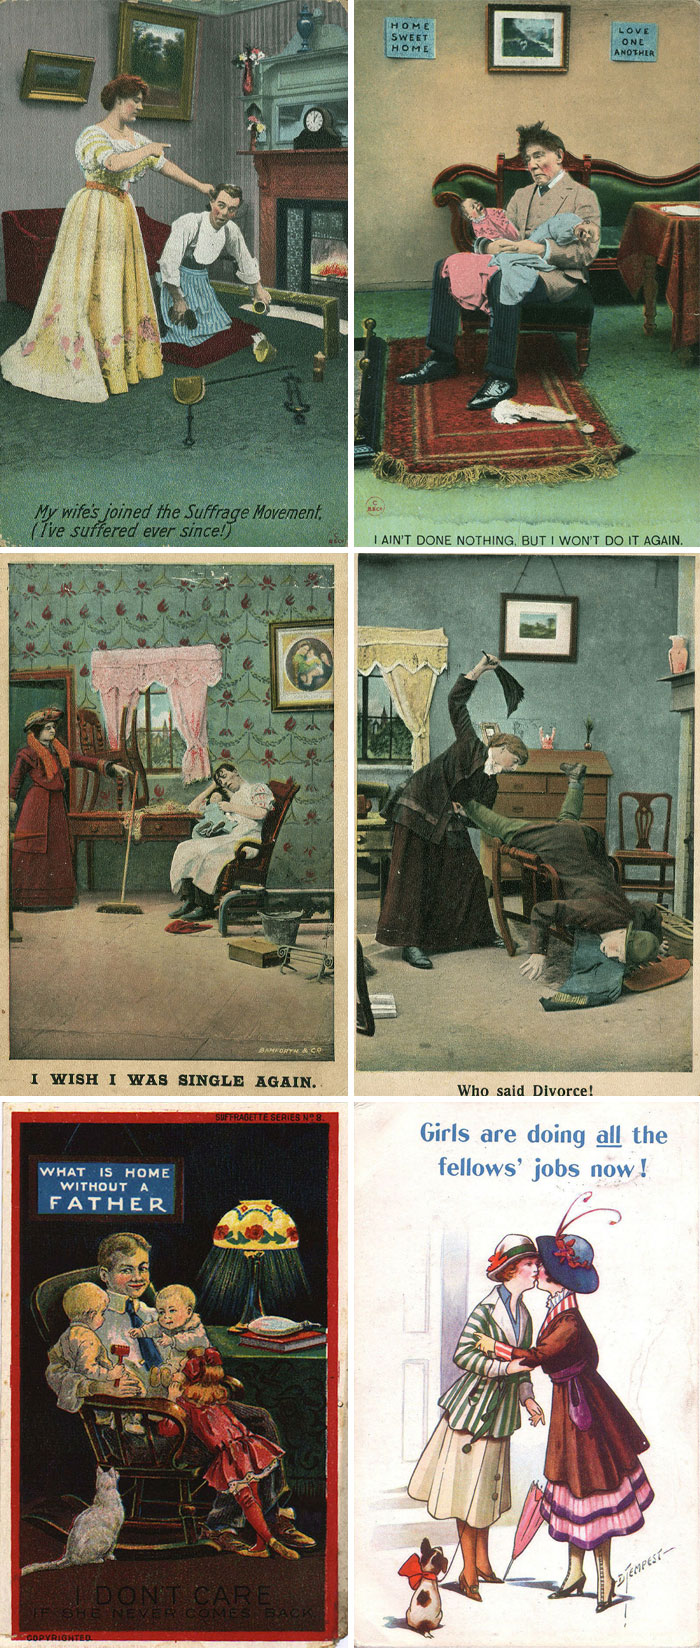 Found Some Vintage Anti-Suffrage Posters That Show How Afraid People Were Of Women Voting